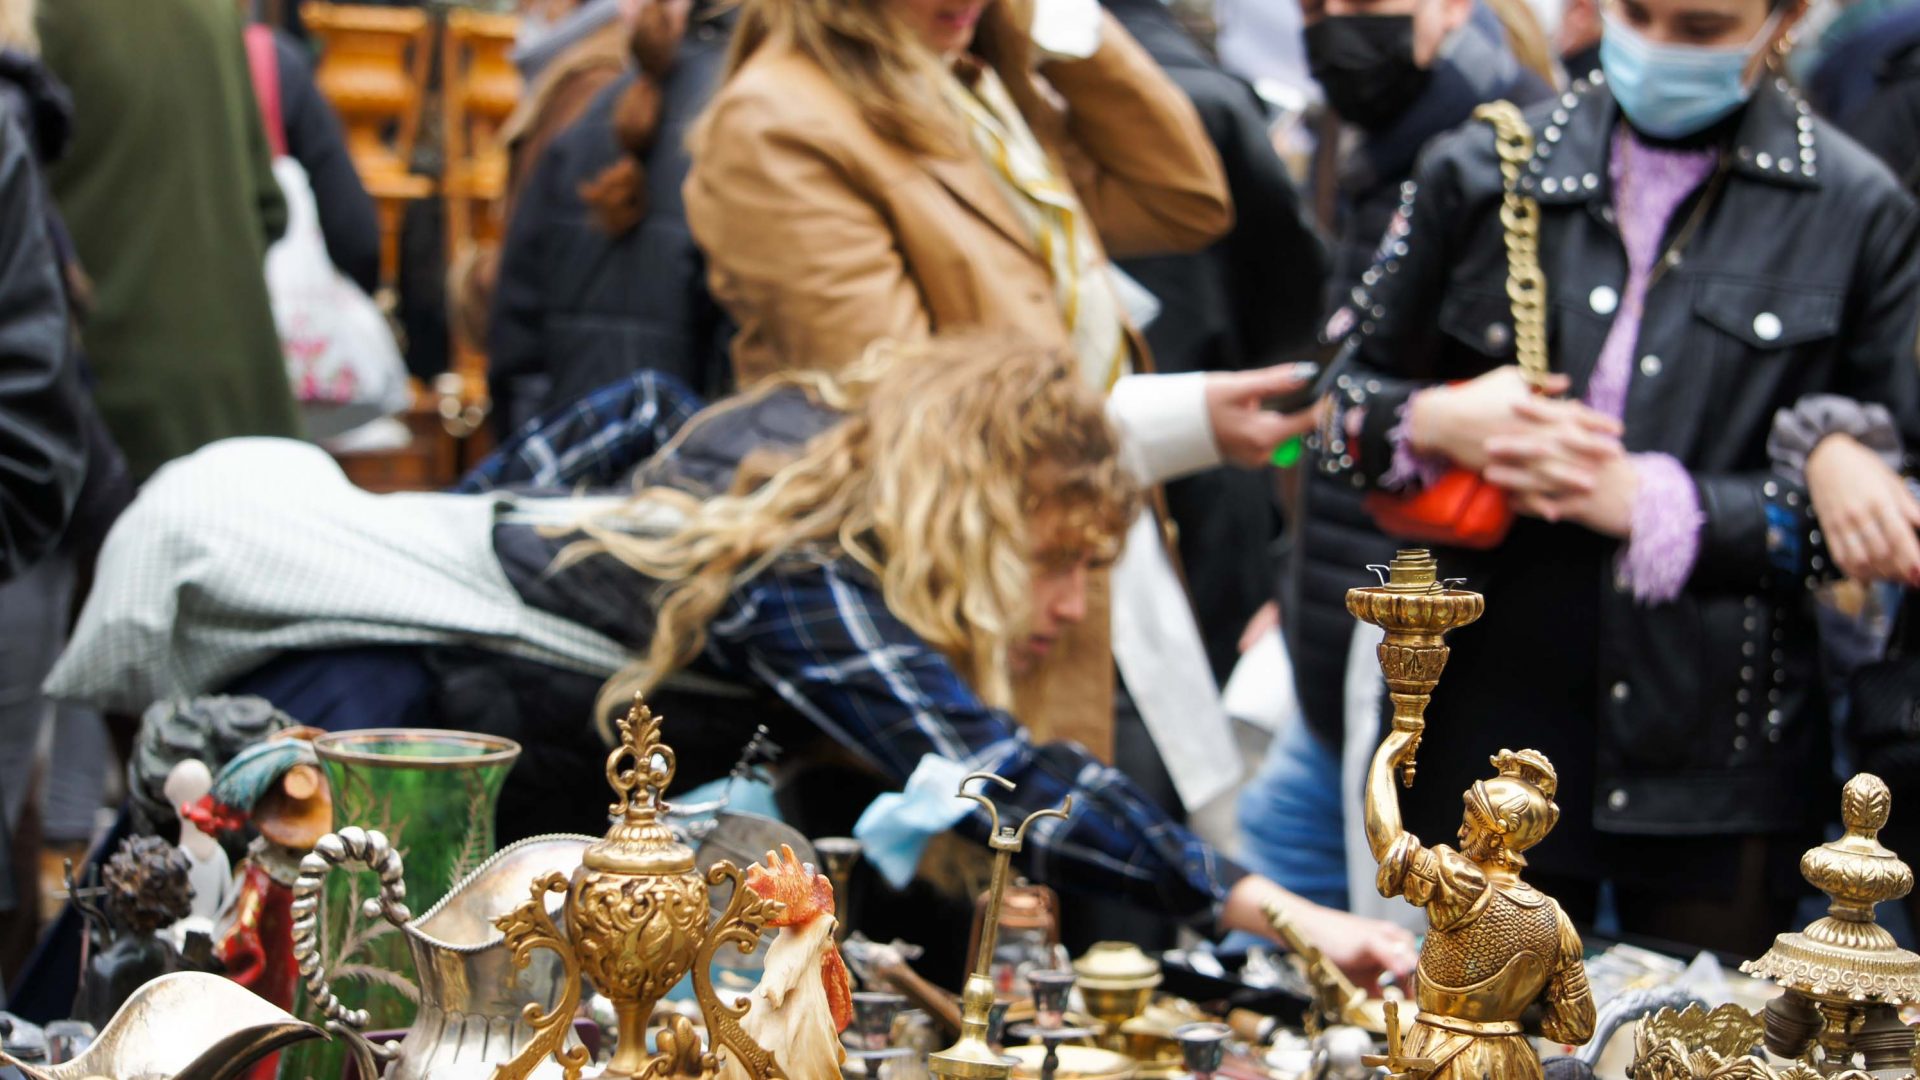 A person looks at objects at a market stall.